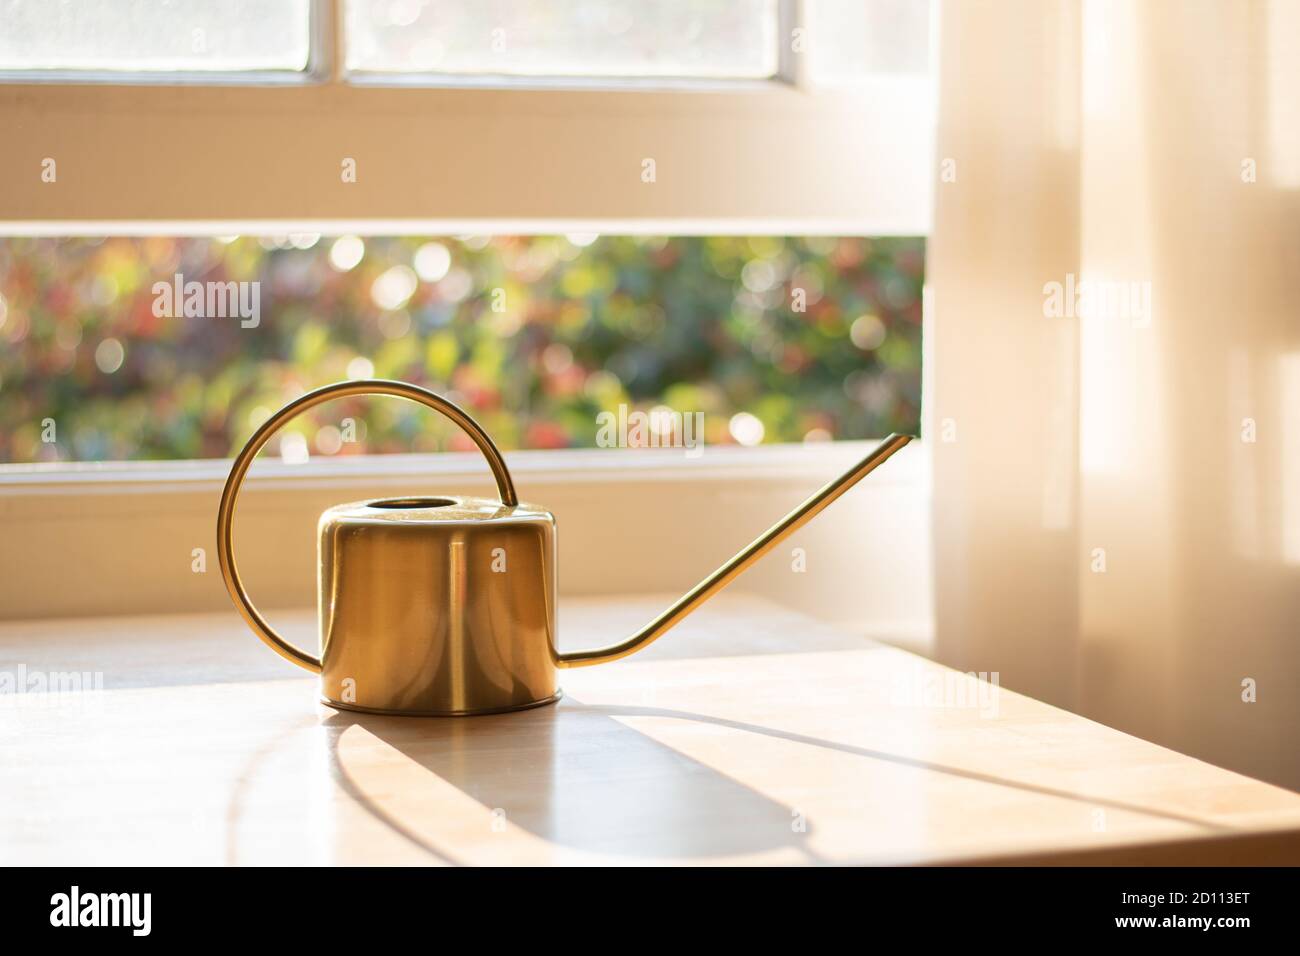 A fancy indoor watering can for plants in a beautifully designed home or apartment interior. Stock Photo